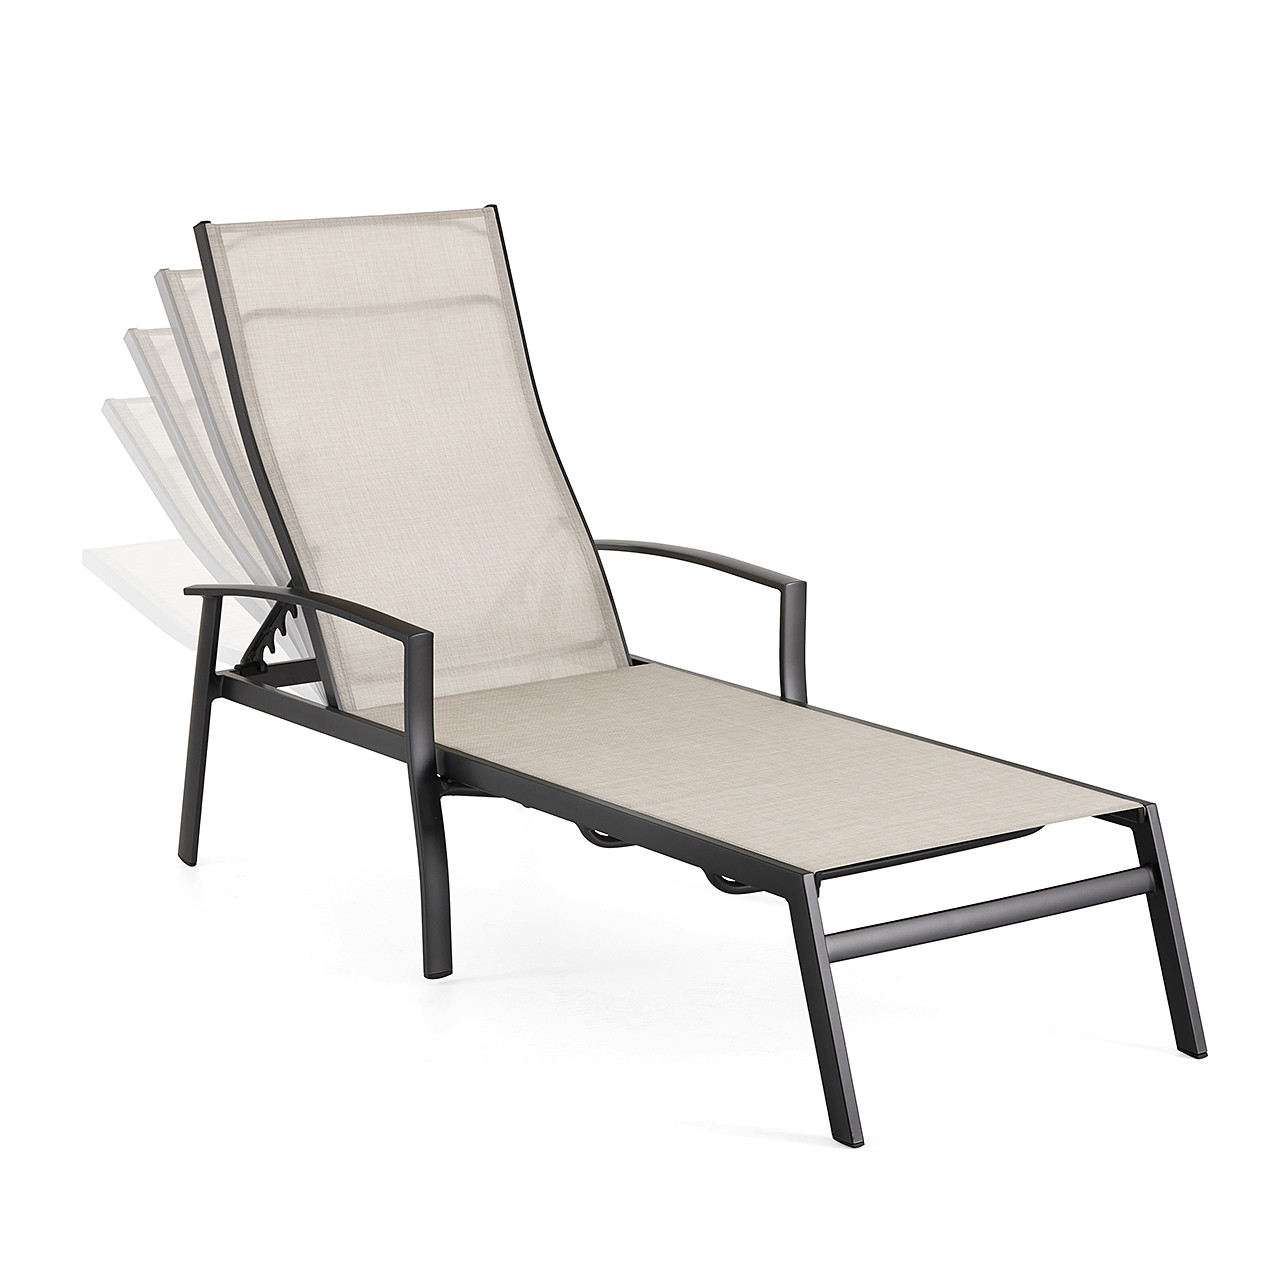 Ventura Textured Black Aluminum with Mica Pearl Sling Chaise Lounge